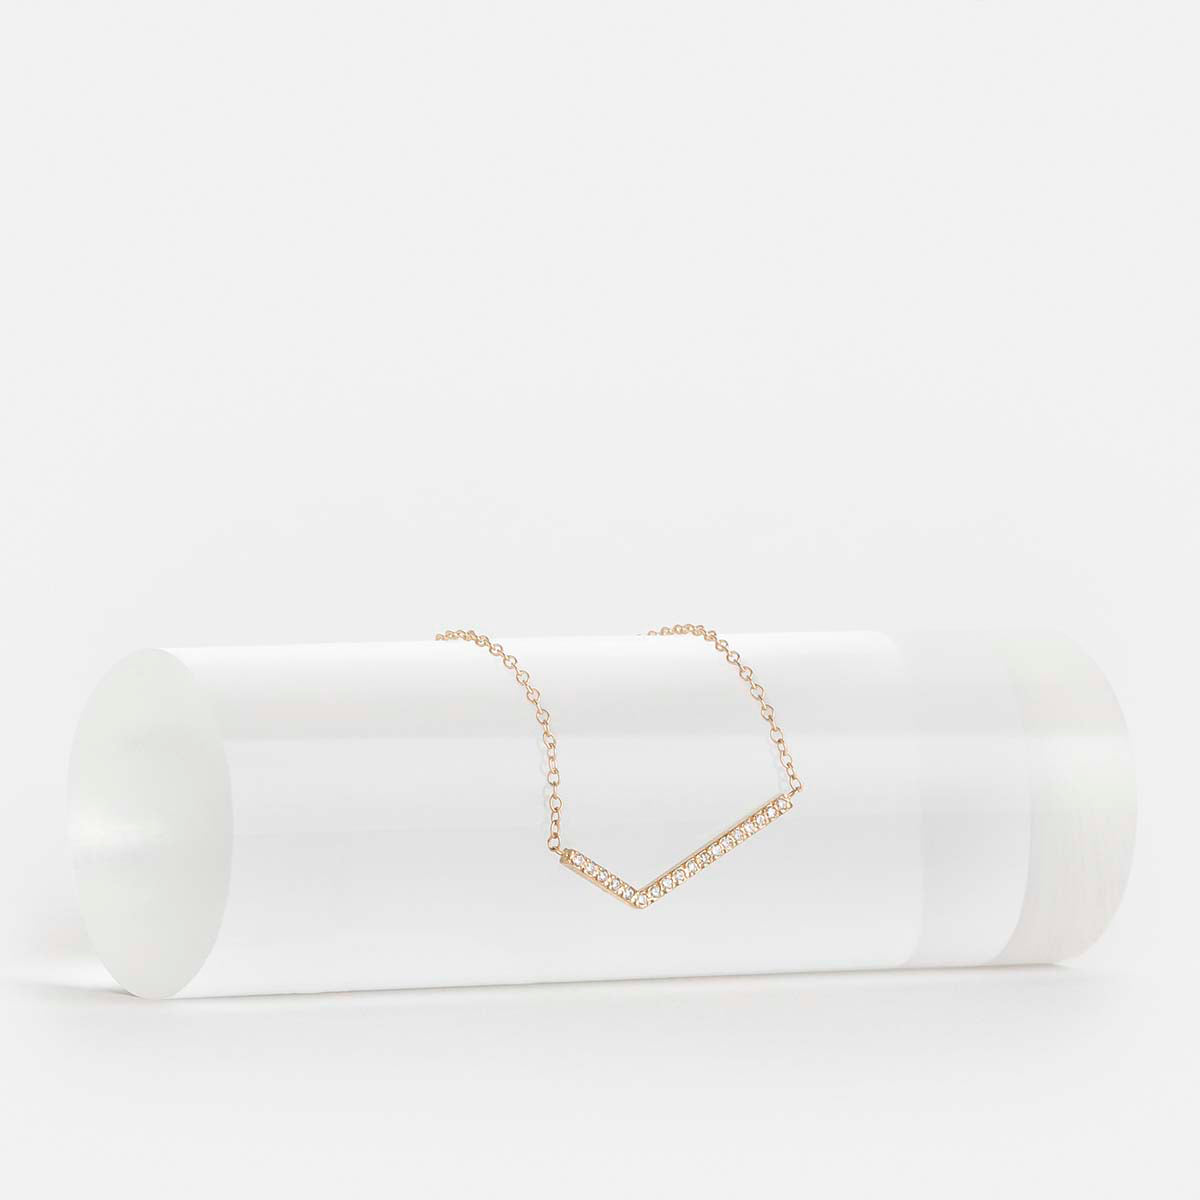 Veva Designer Necklace in 14k Gold set with White Diamonds By SHW Fine Jewelry NYC